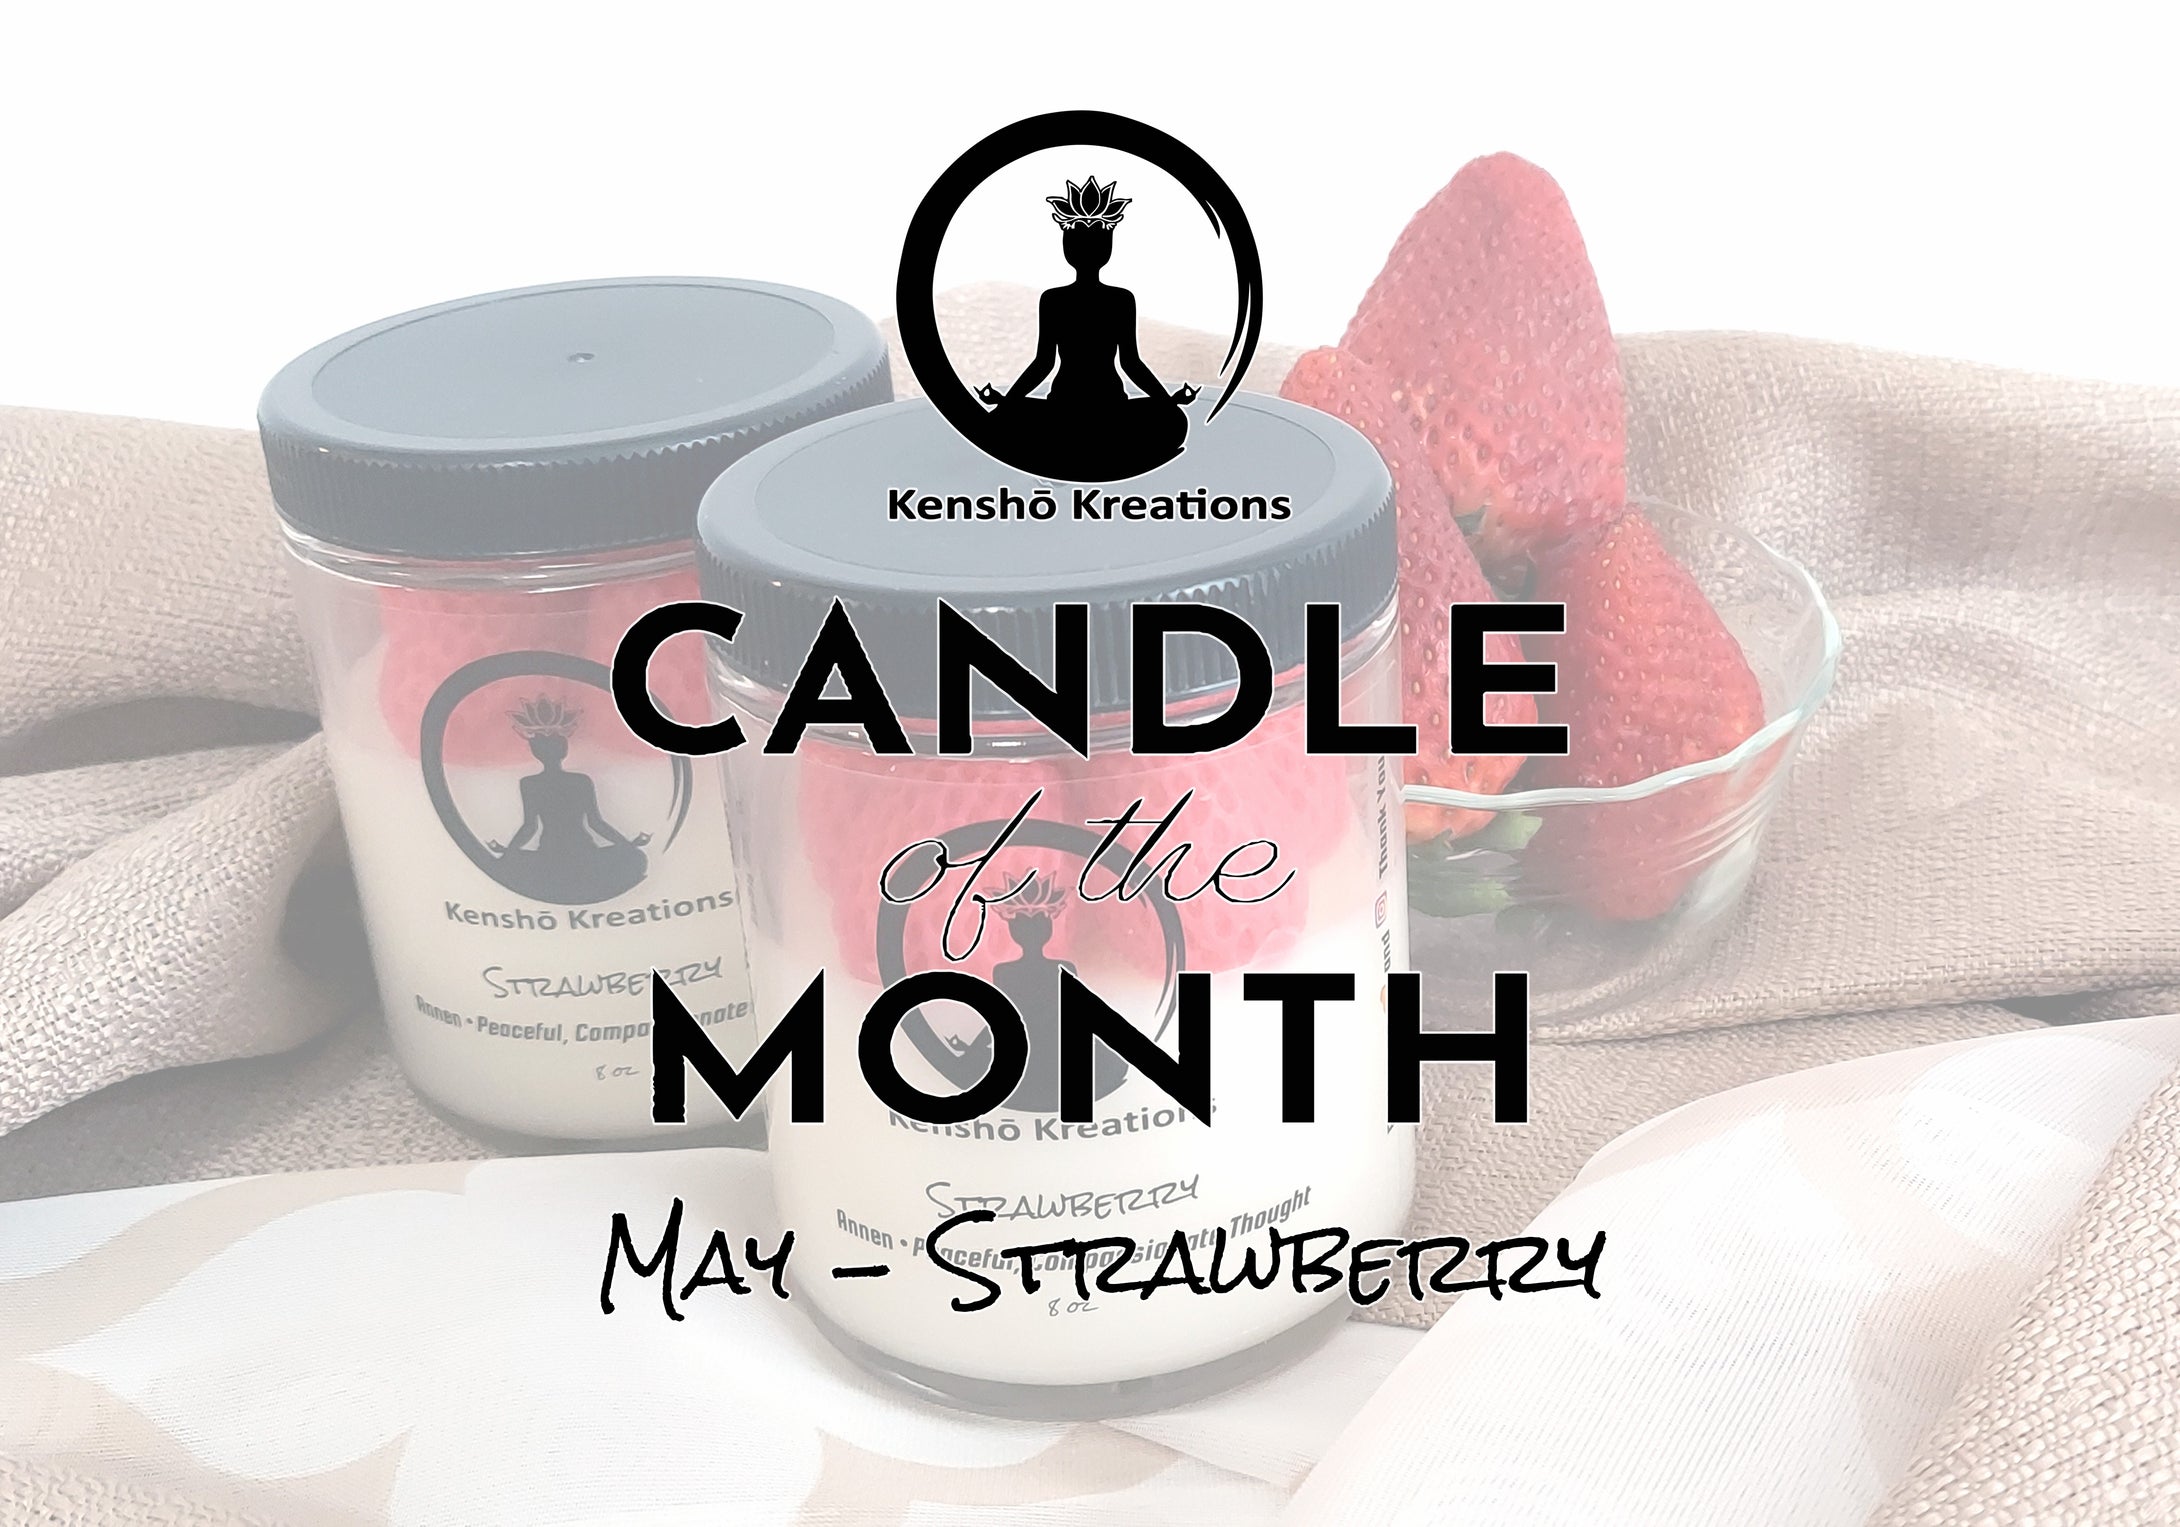 Candle of the Month - Strawberry